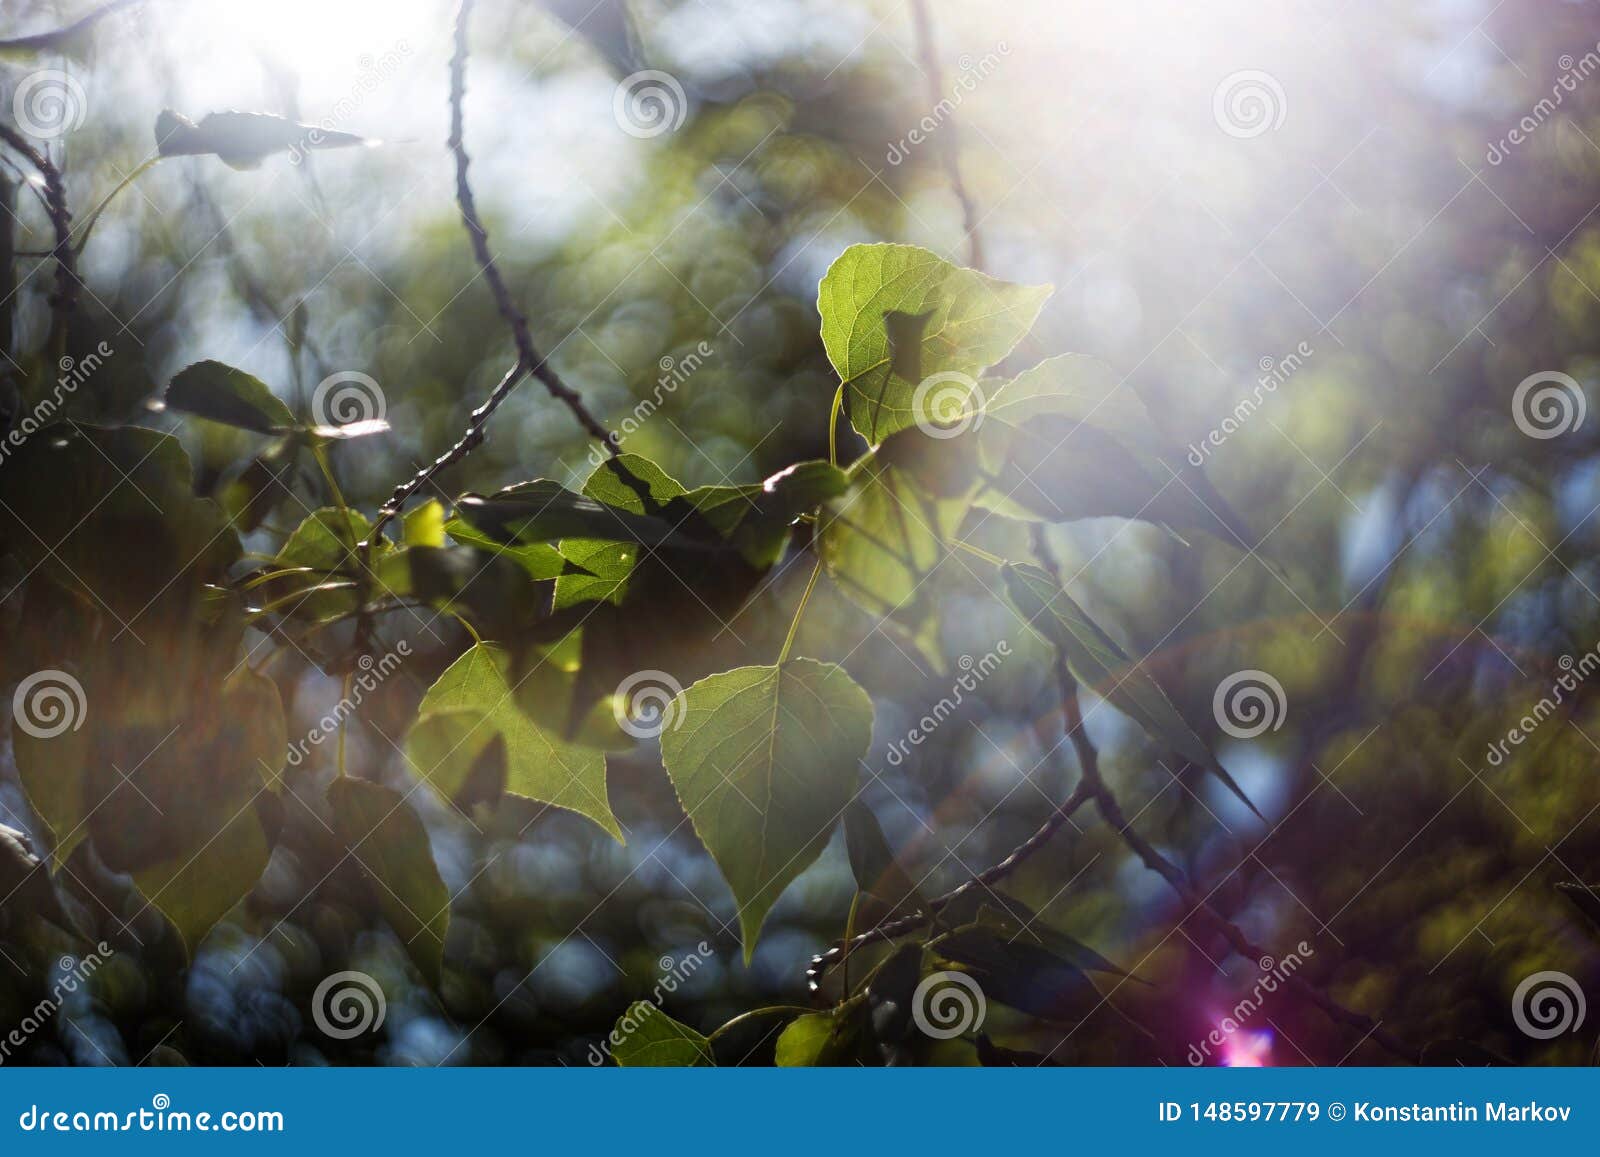 Abstract Blurred Natural Background with Tree Foliage Stock Image ...